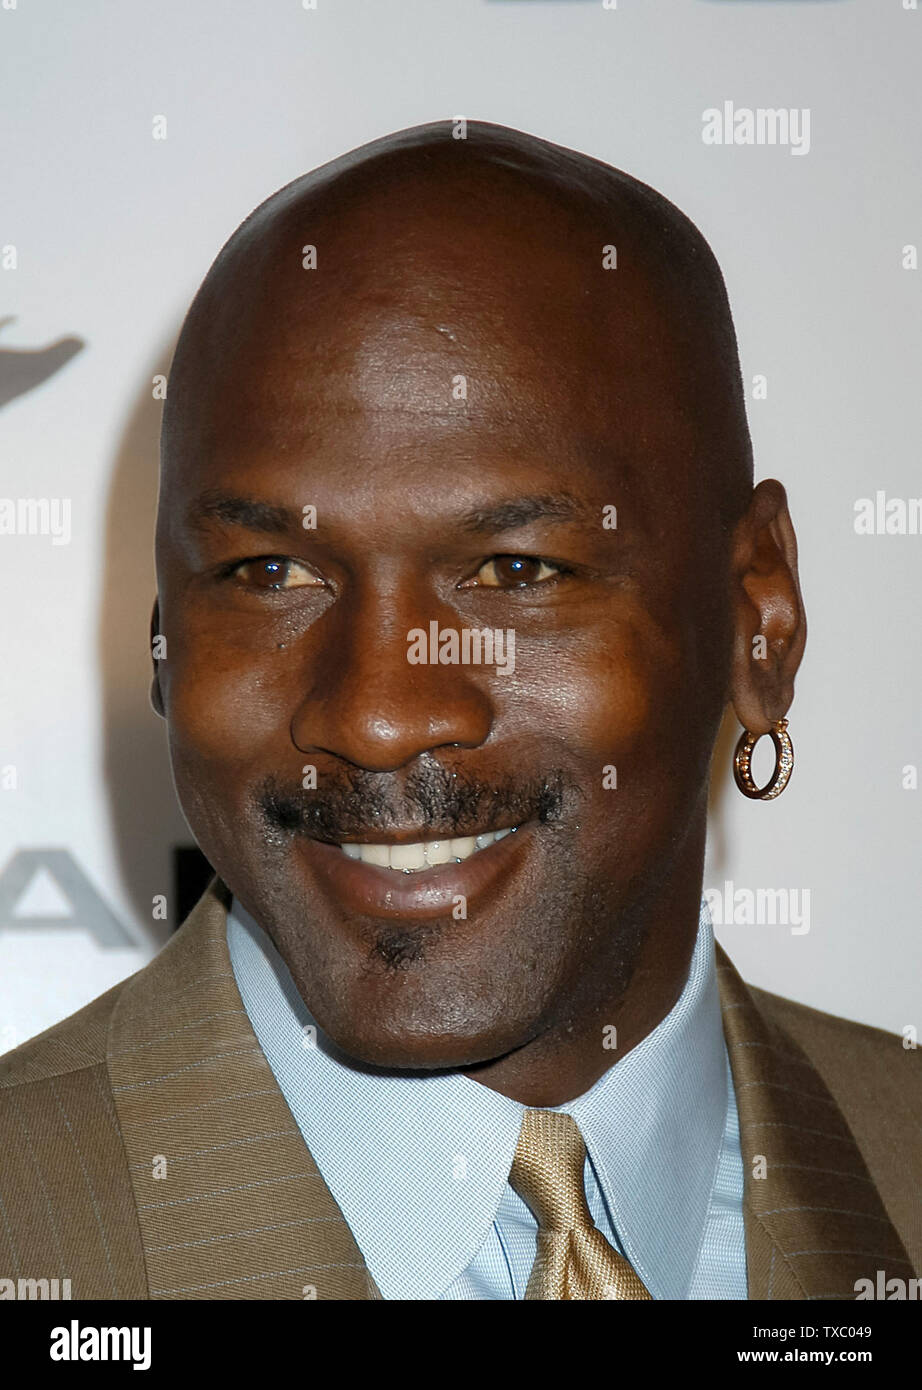 Michael Jordan at Jordan's NBA All Star Comedy Court and Celebrity After Party at the Wadsworth Theatre in Los Angeles, CA. The event took place on Friday, February 13, 2004. Photo by: SBM / PictureLux  -  File Reference # 33790-4274SMBPLX Stock Photo